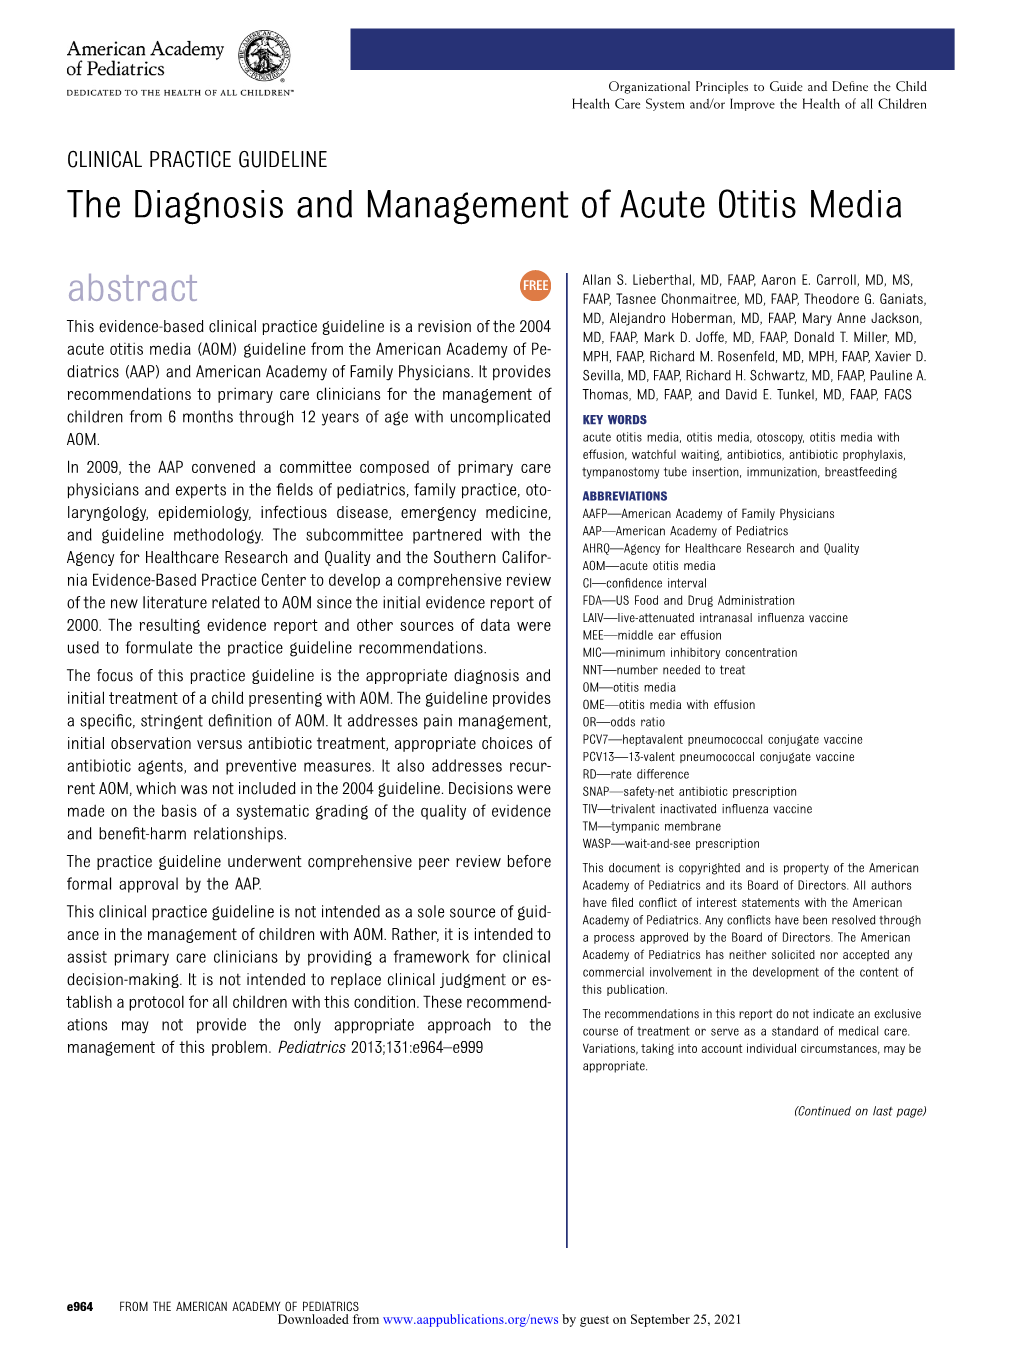 The Diagnosis and Management of Acute Otitis Media Abstract